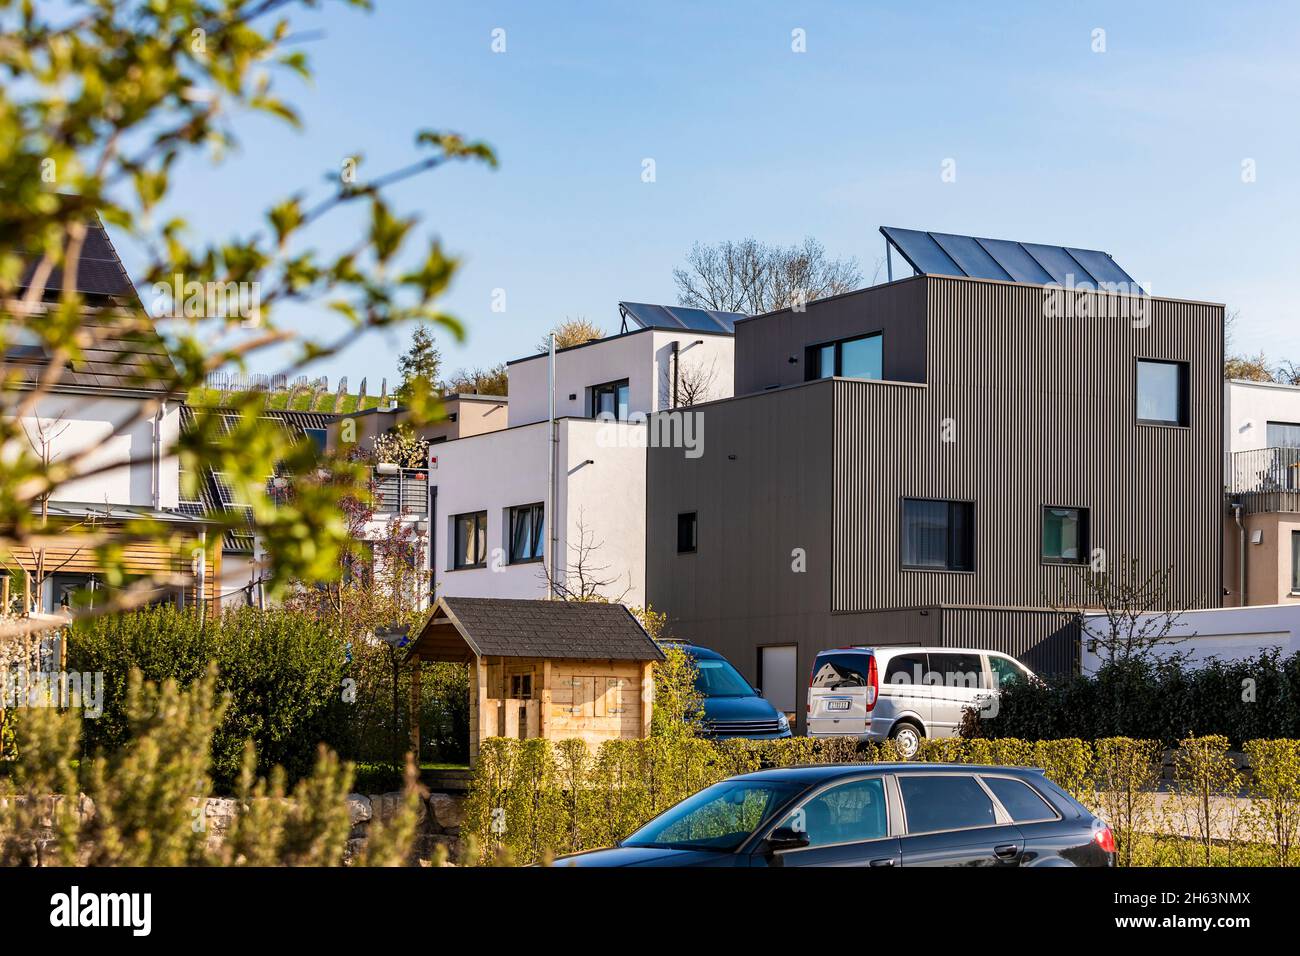 germany,baden-wuerttemberg,waiblingen,new housing estate,modern single-family houses with photovoltaic systems Stock Photo